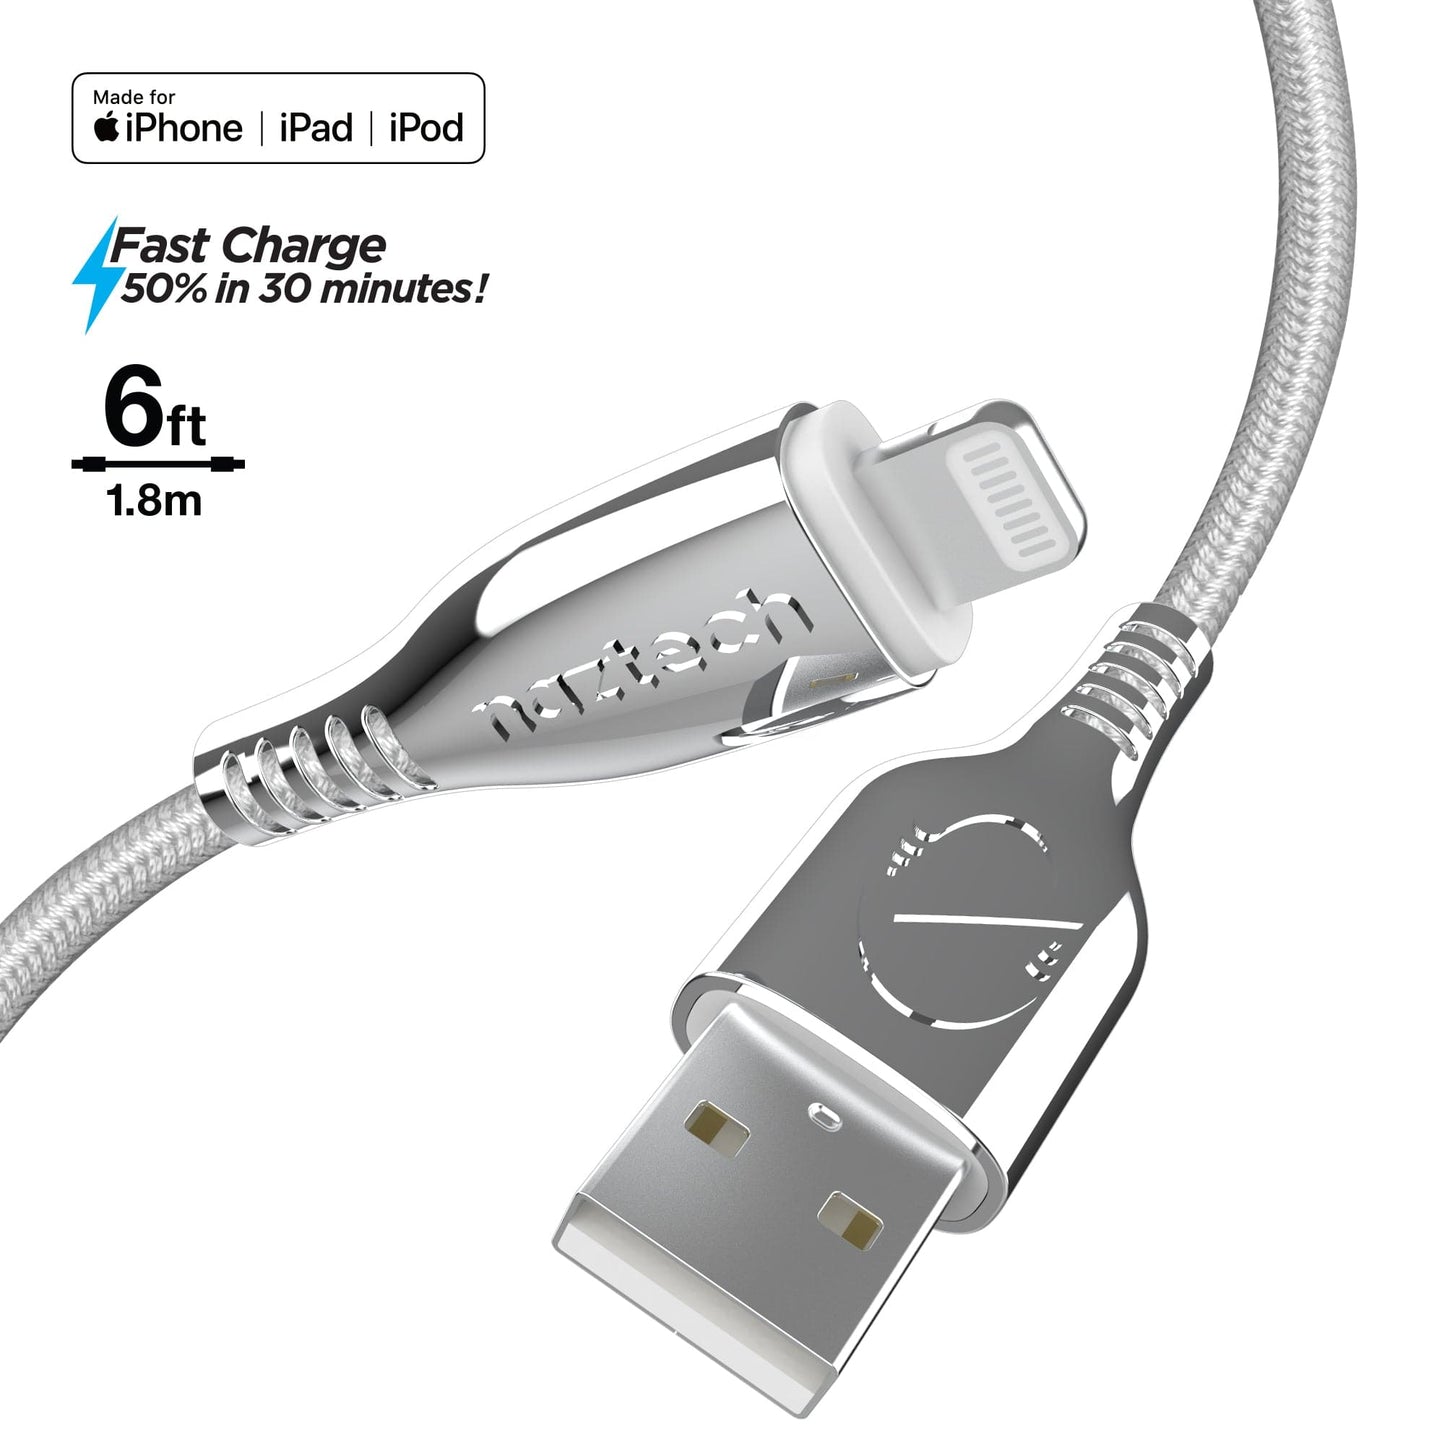 Naztech TITANIUM USB to Lightning Braided Cable - 6ft - Color Options